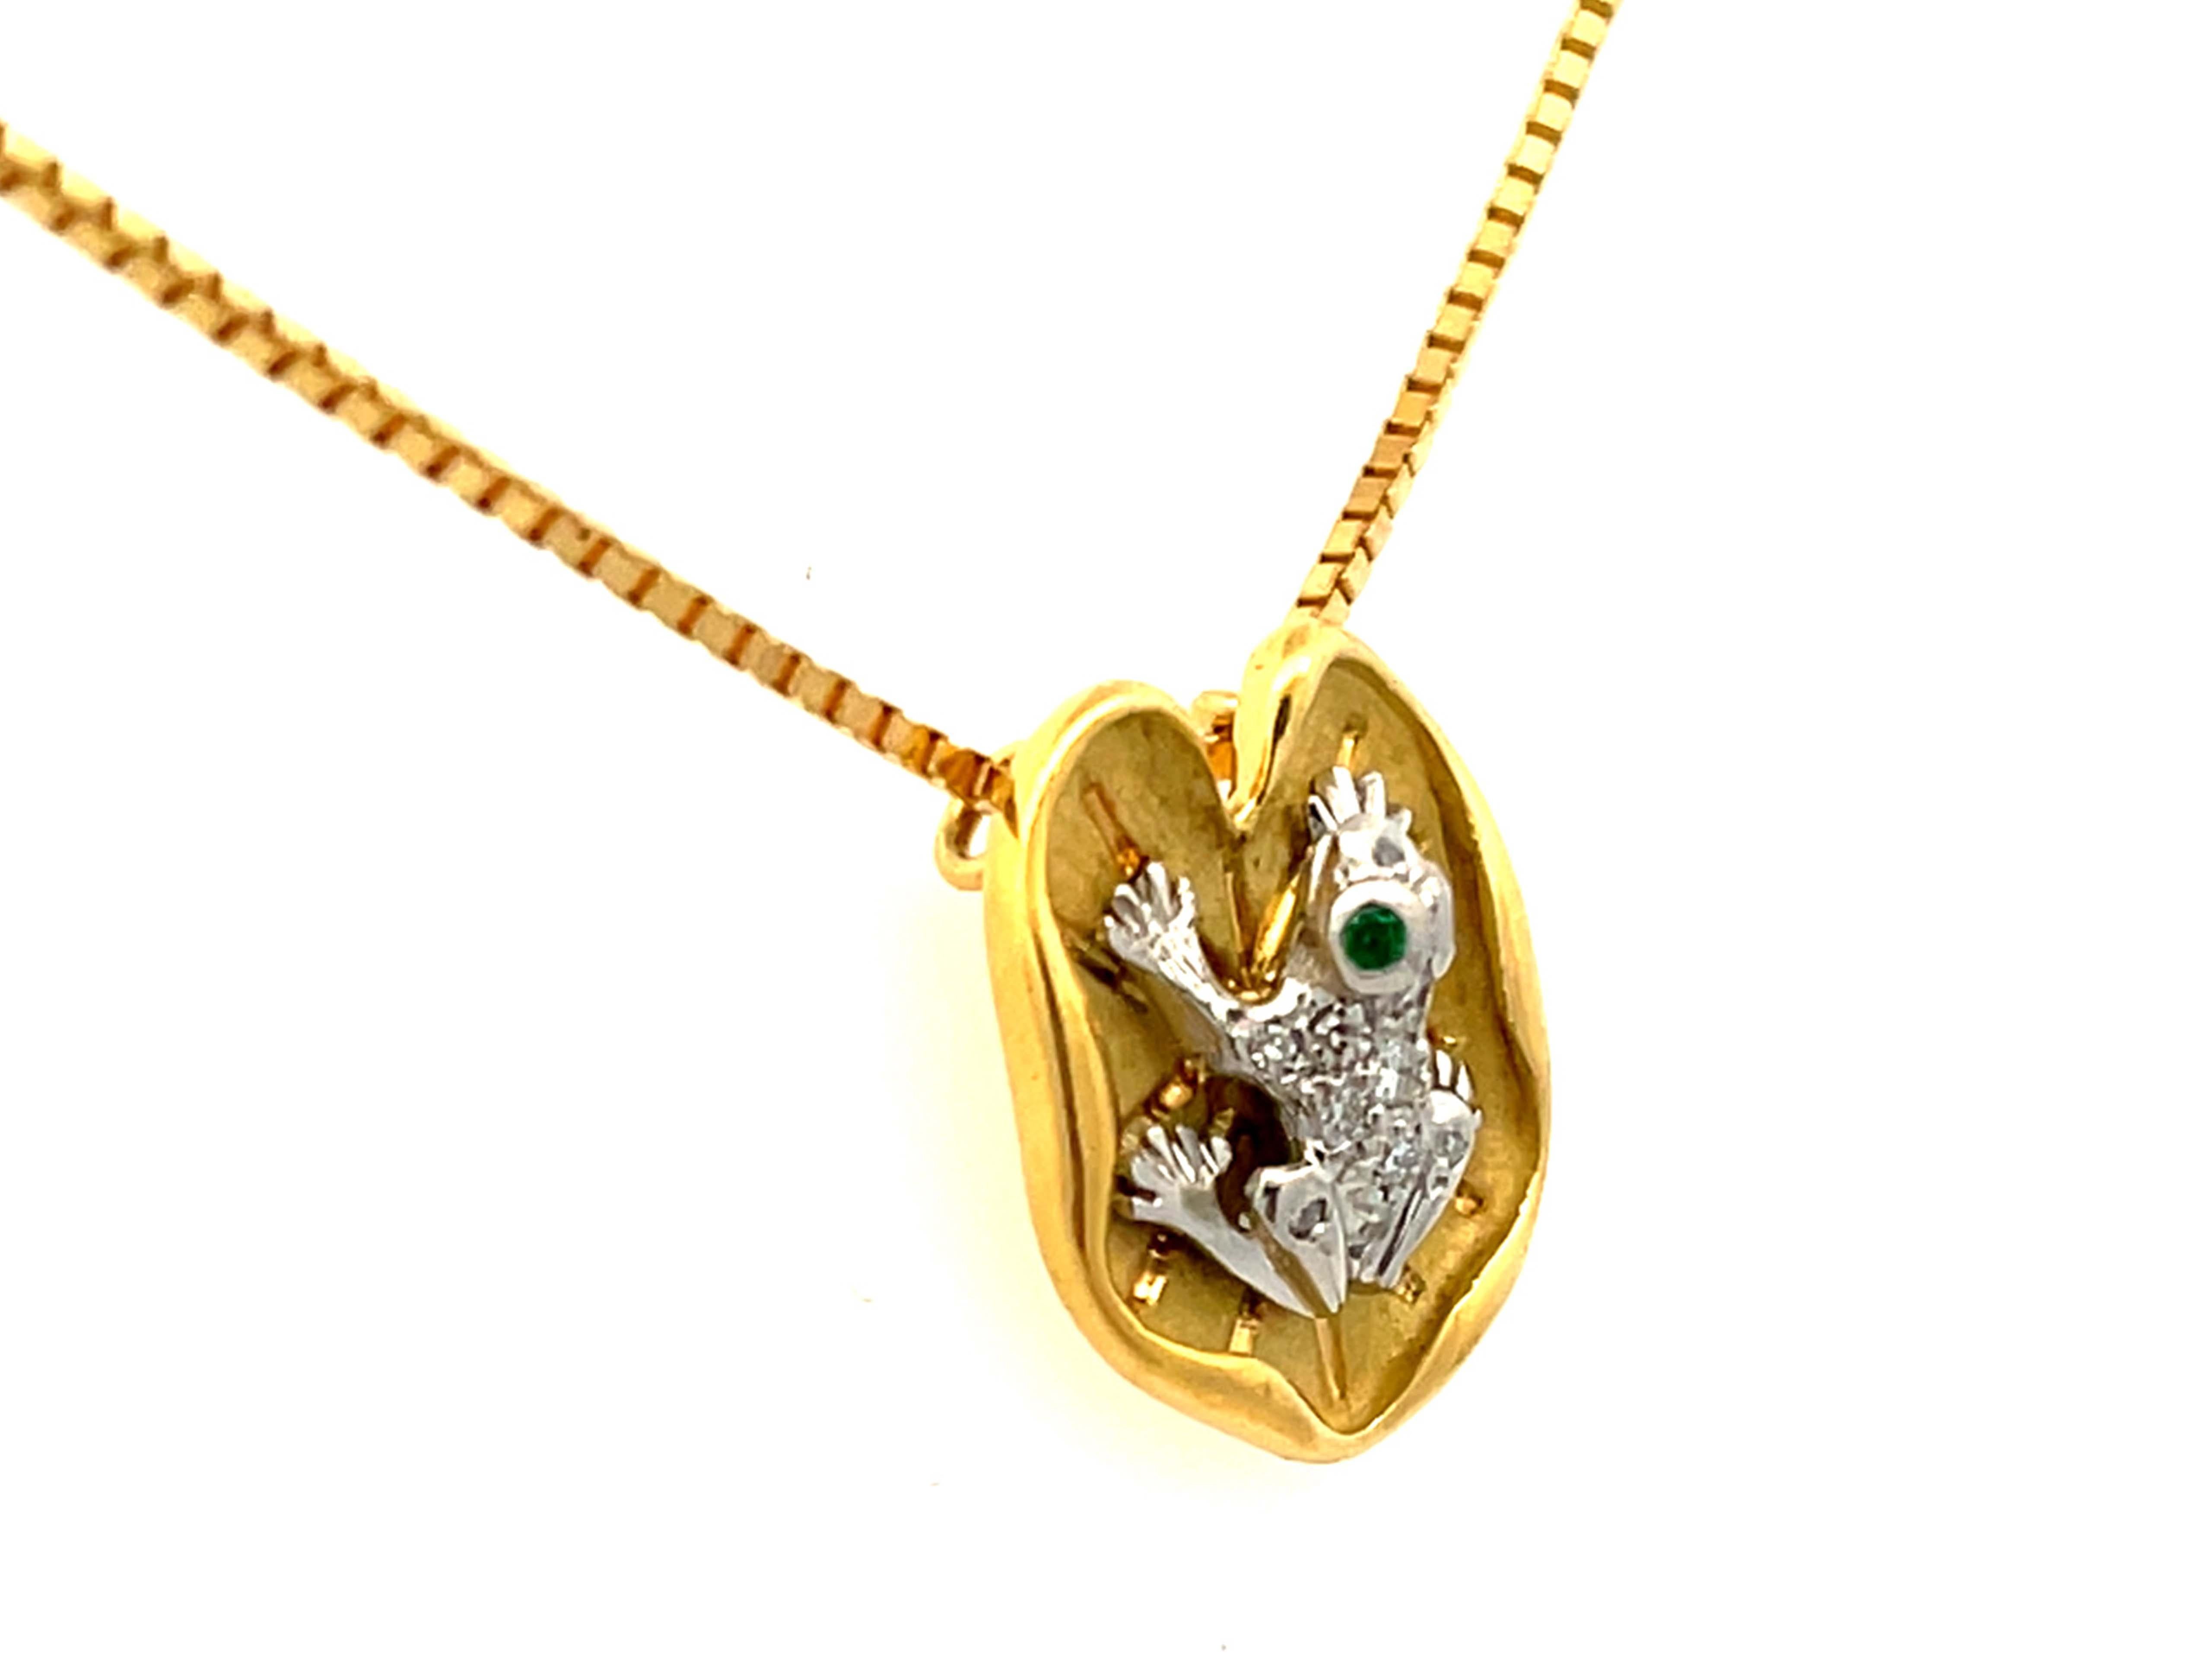 Modern Emerald Eyes & Diamond Frog Necklace on Lily Pad in 18k Yellow Gold and Platinum